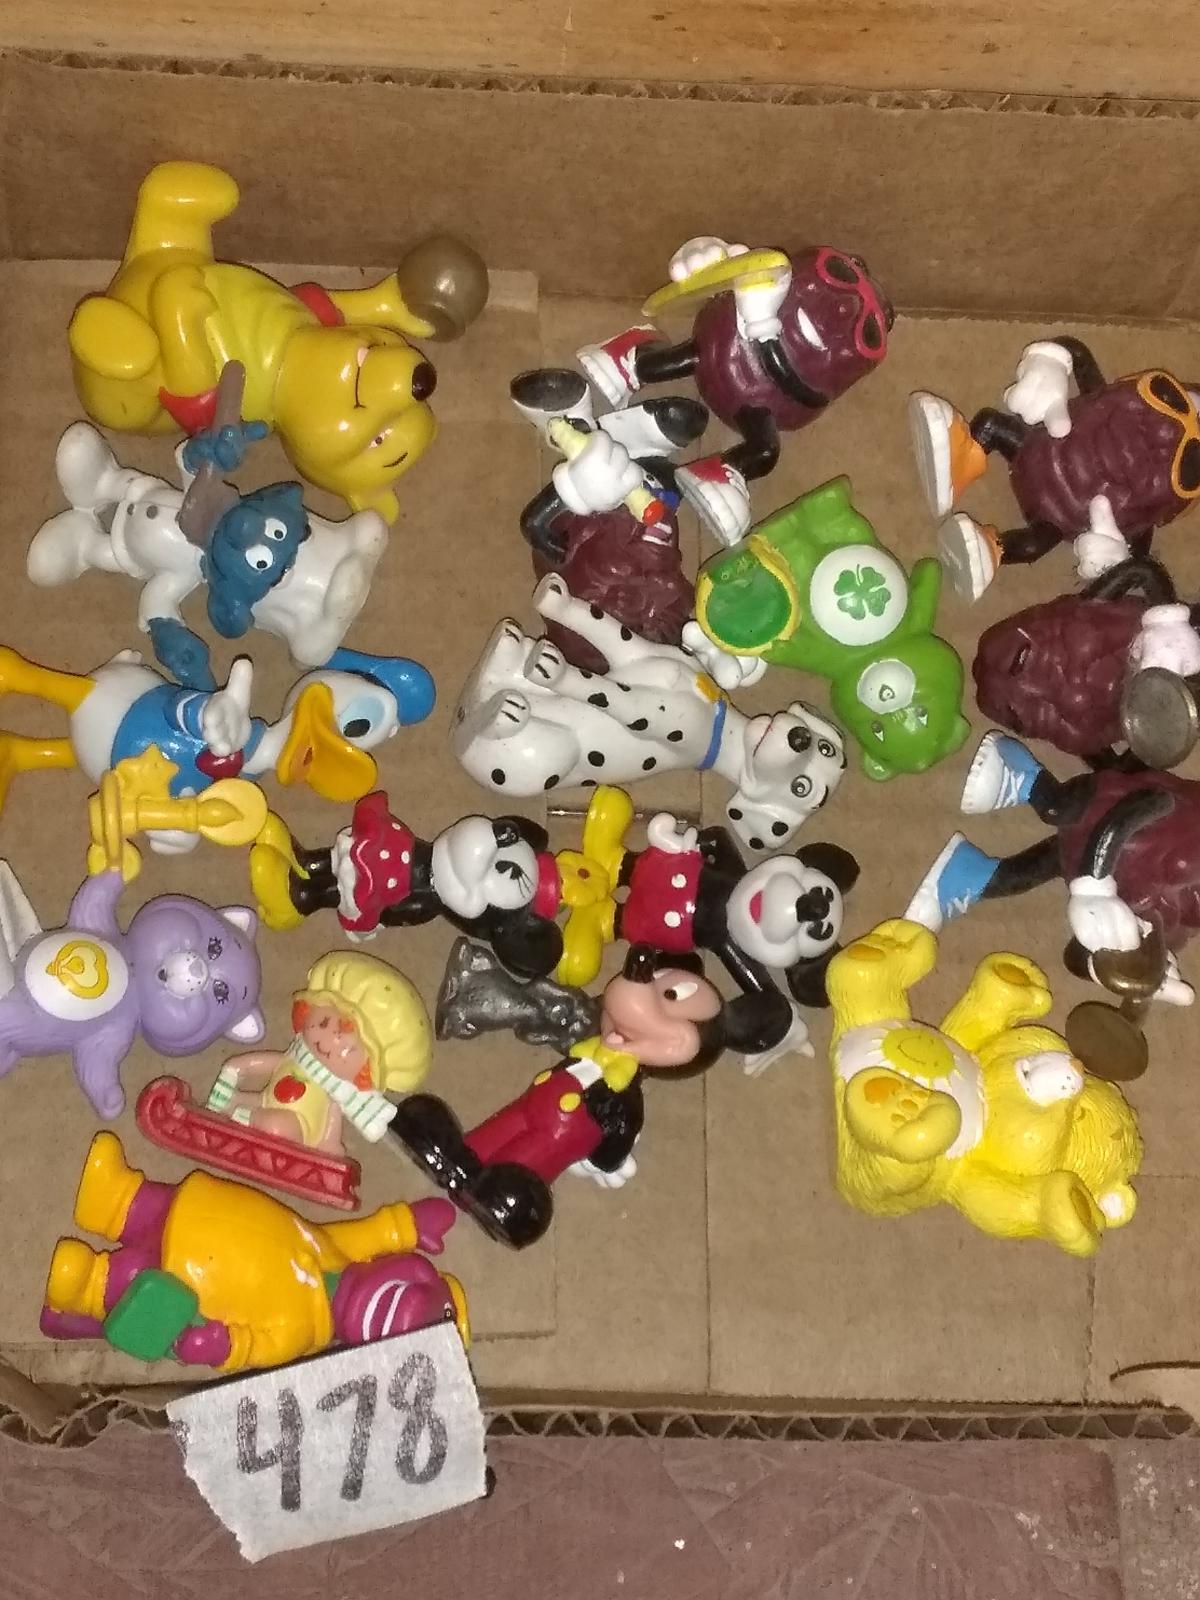 BL-Assorted Miniature Collectible Figures-Disney, Care Bears, Calif Grapes